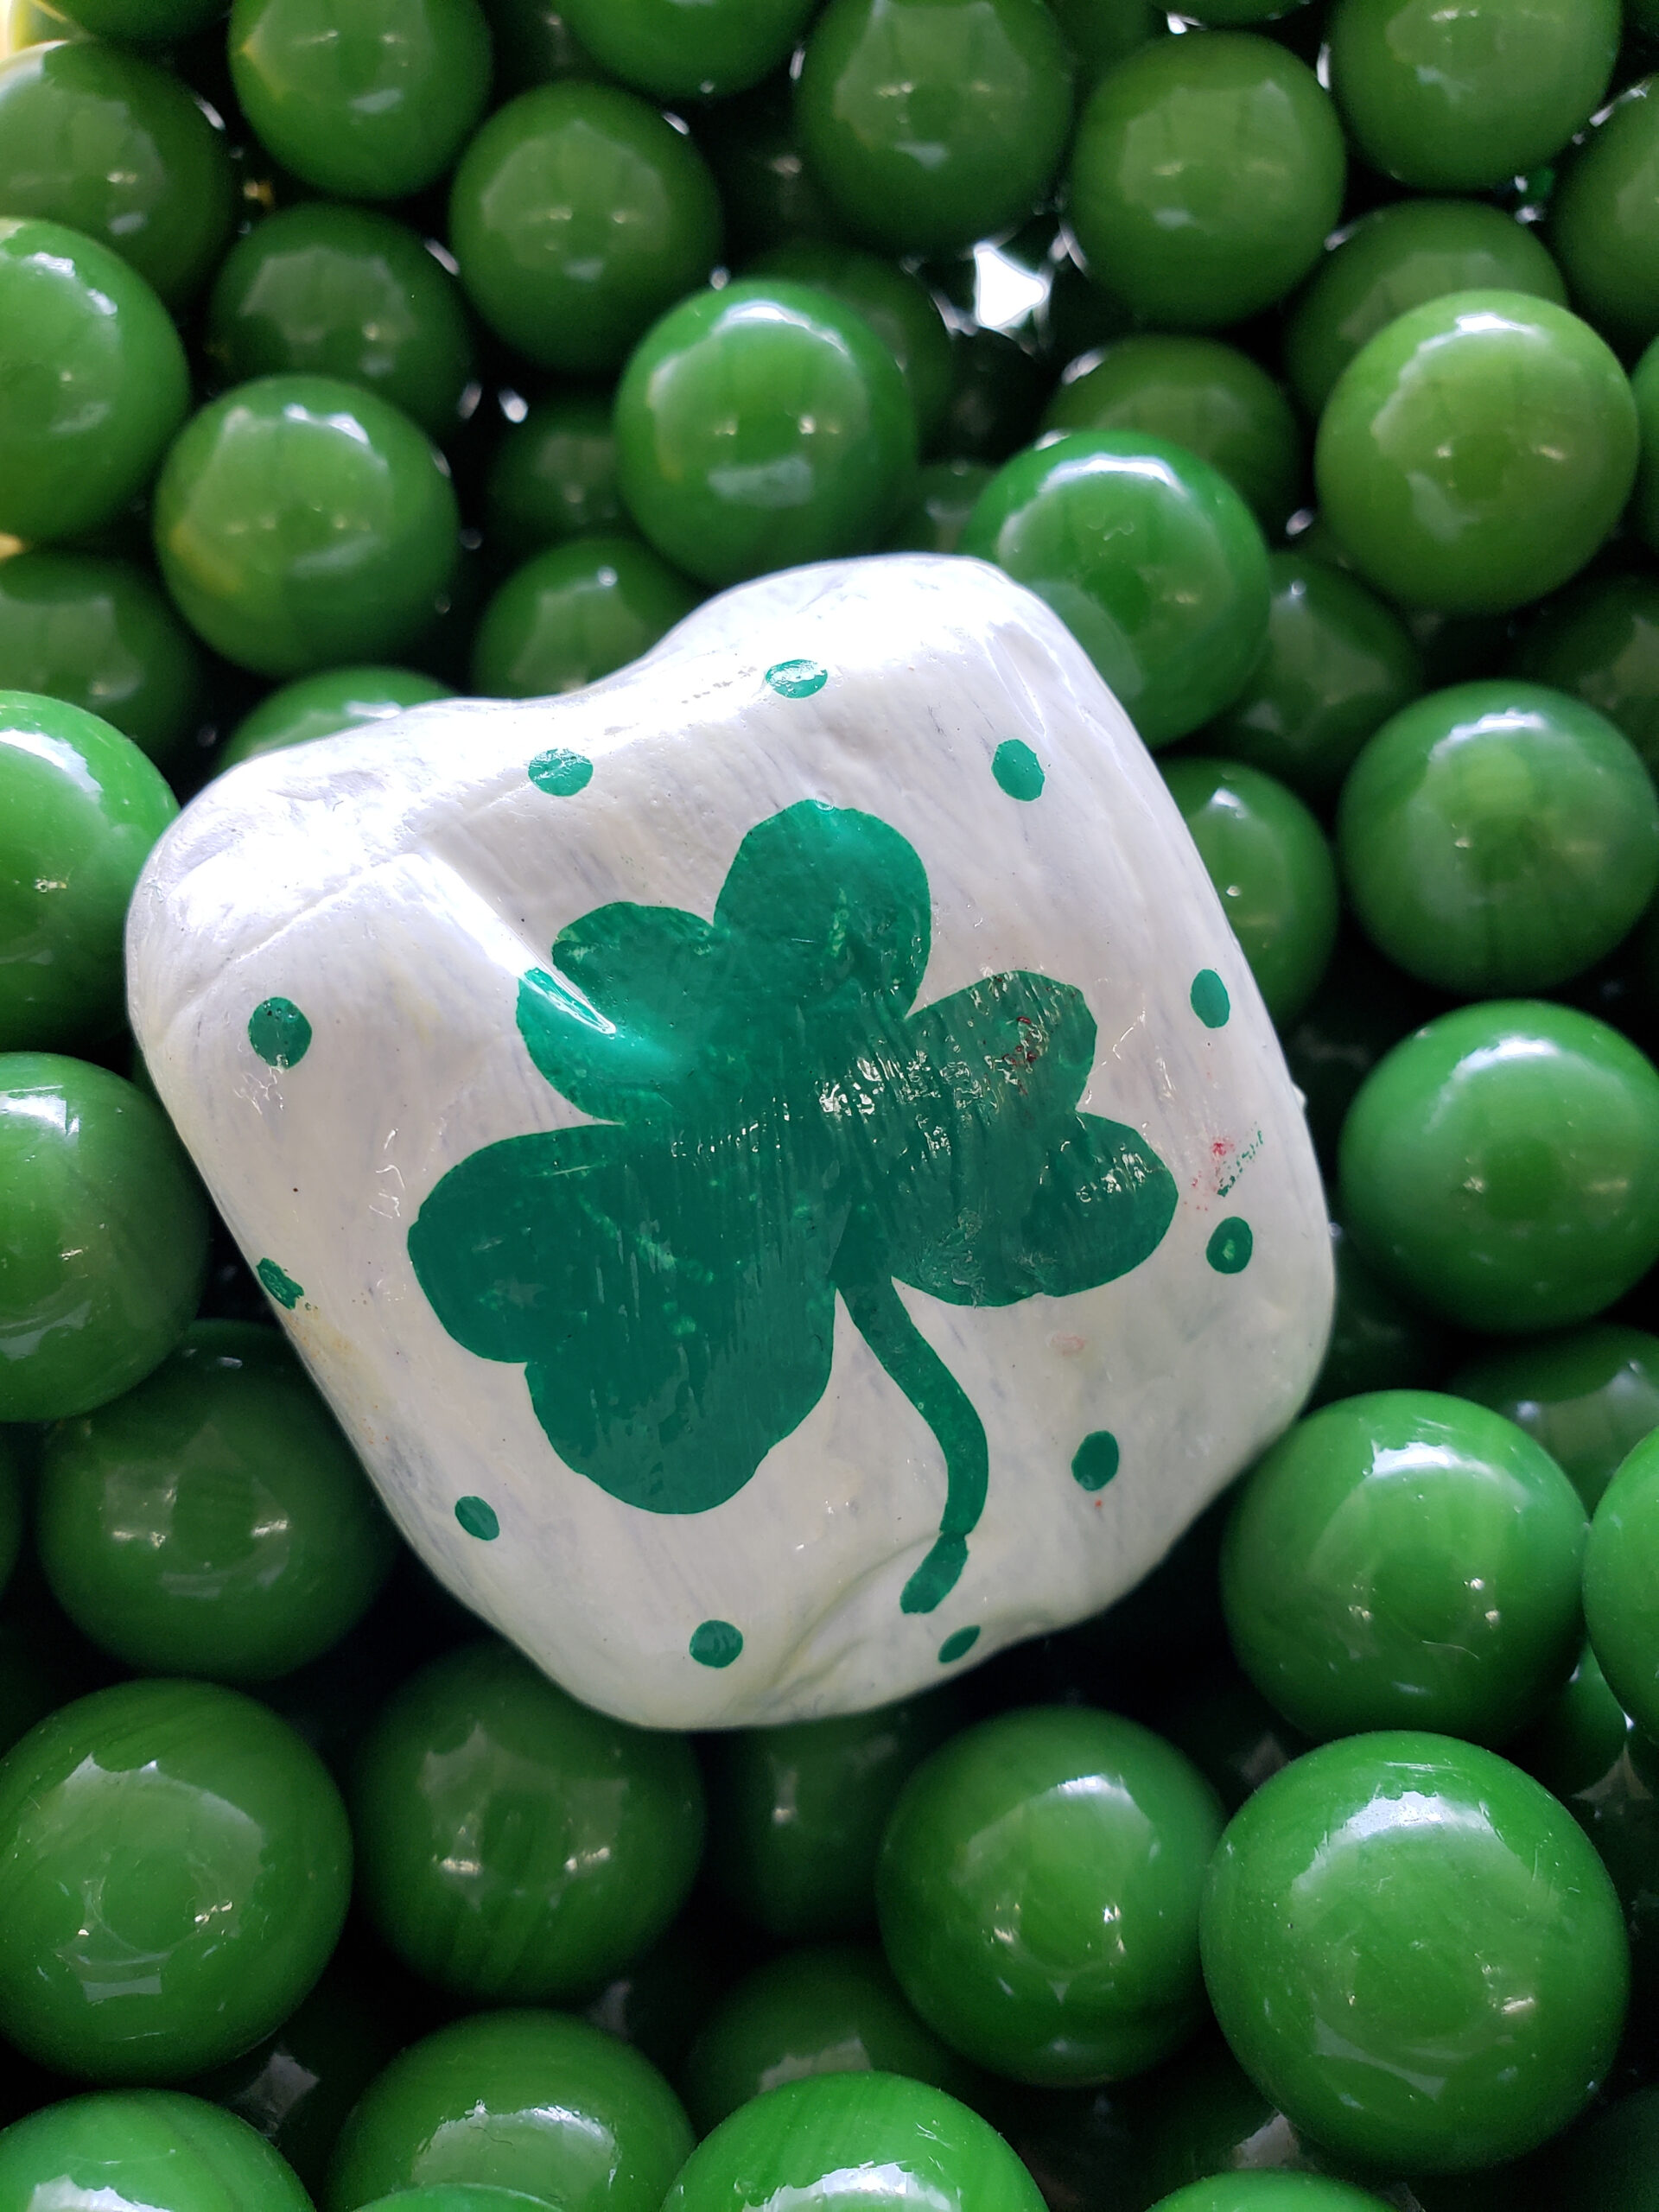 Shamrock painted on a rock